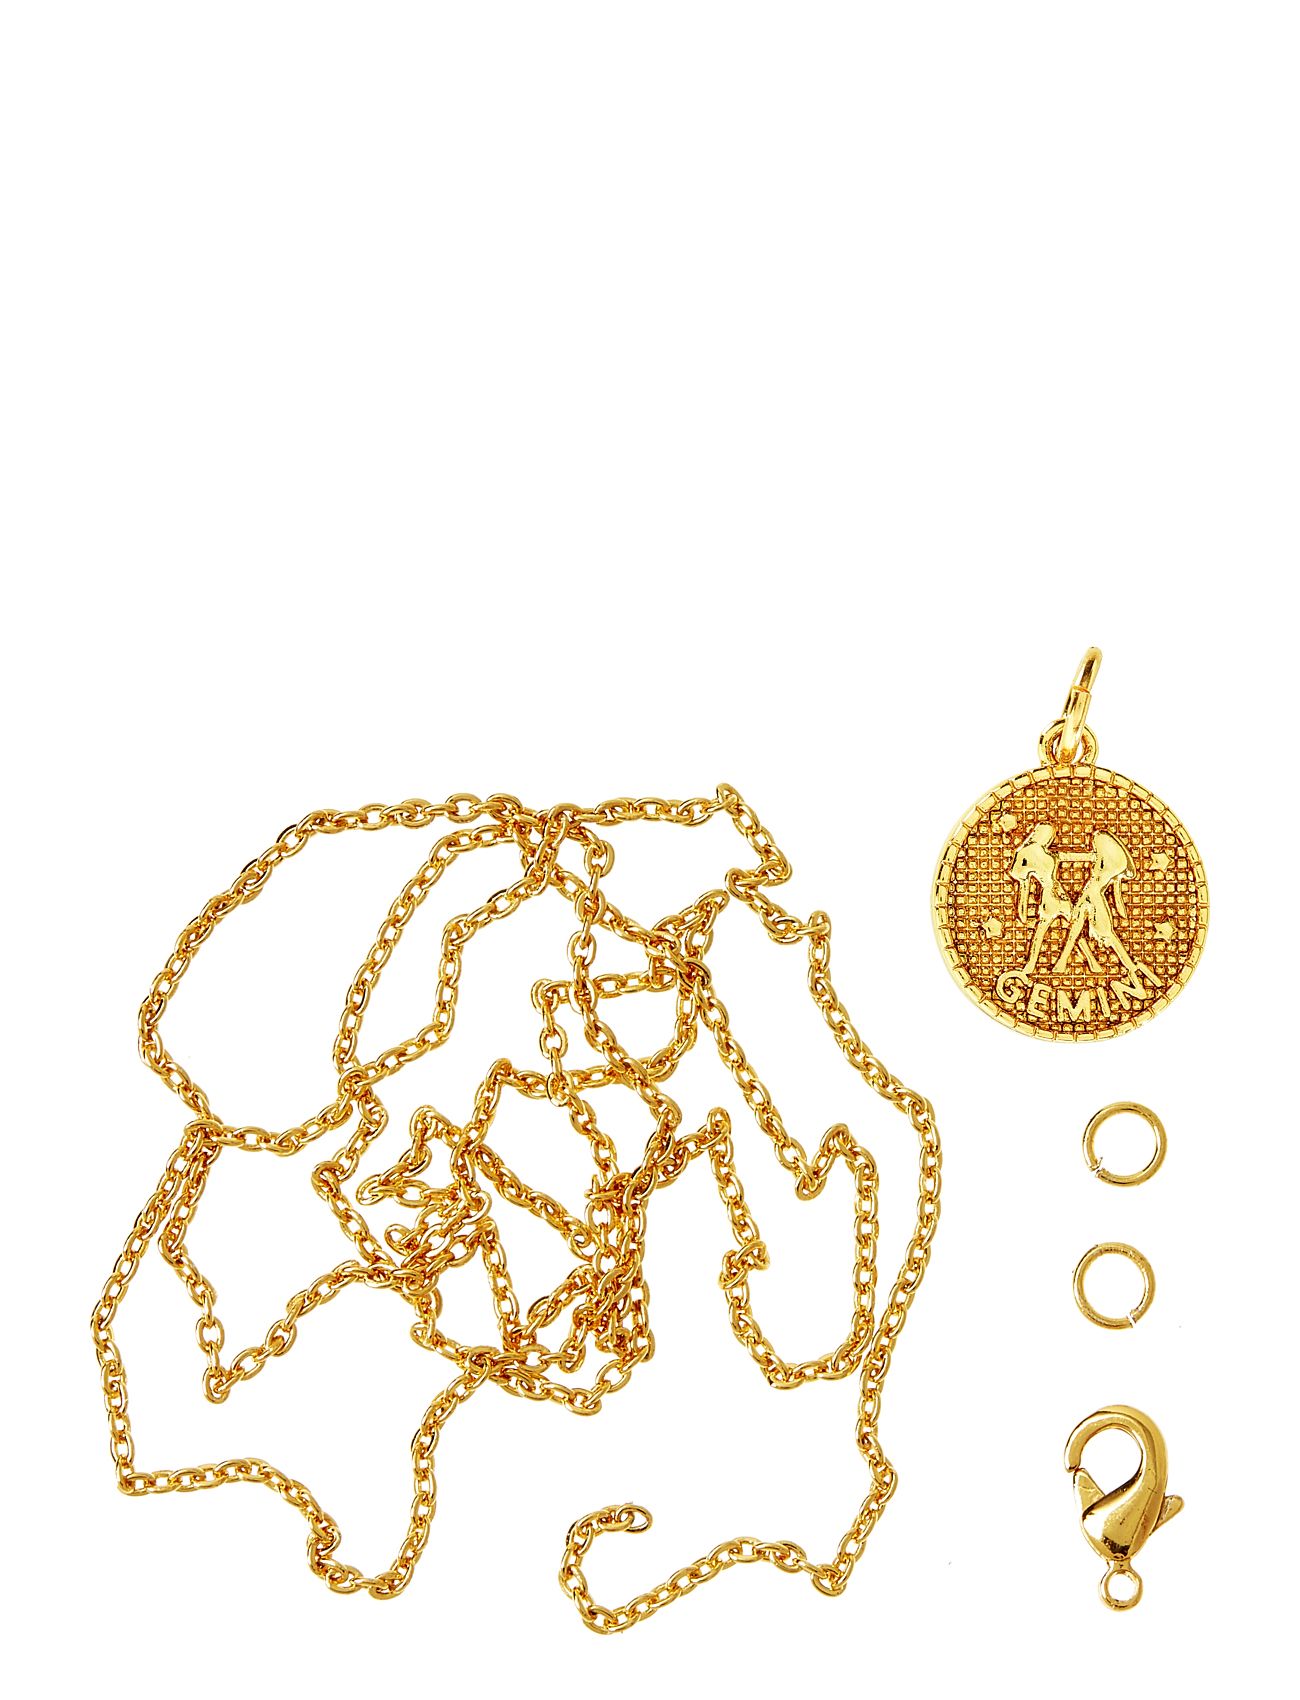 Zodiac Coin Pendant And Chain Set, Gemini Toys Creativity Drawing & Crafts Craft Jewellery & Accessories Gold Me & My Box